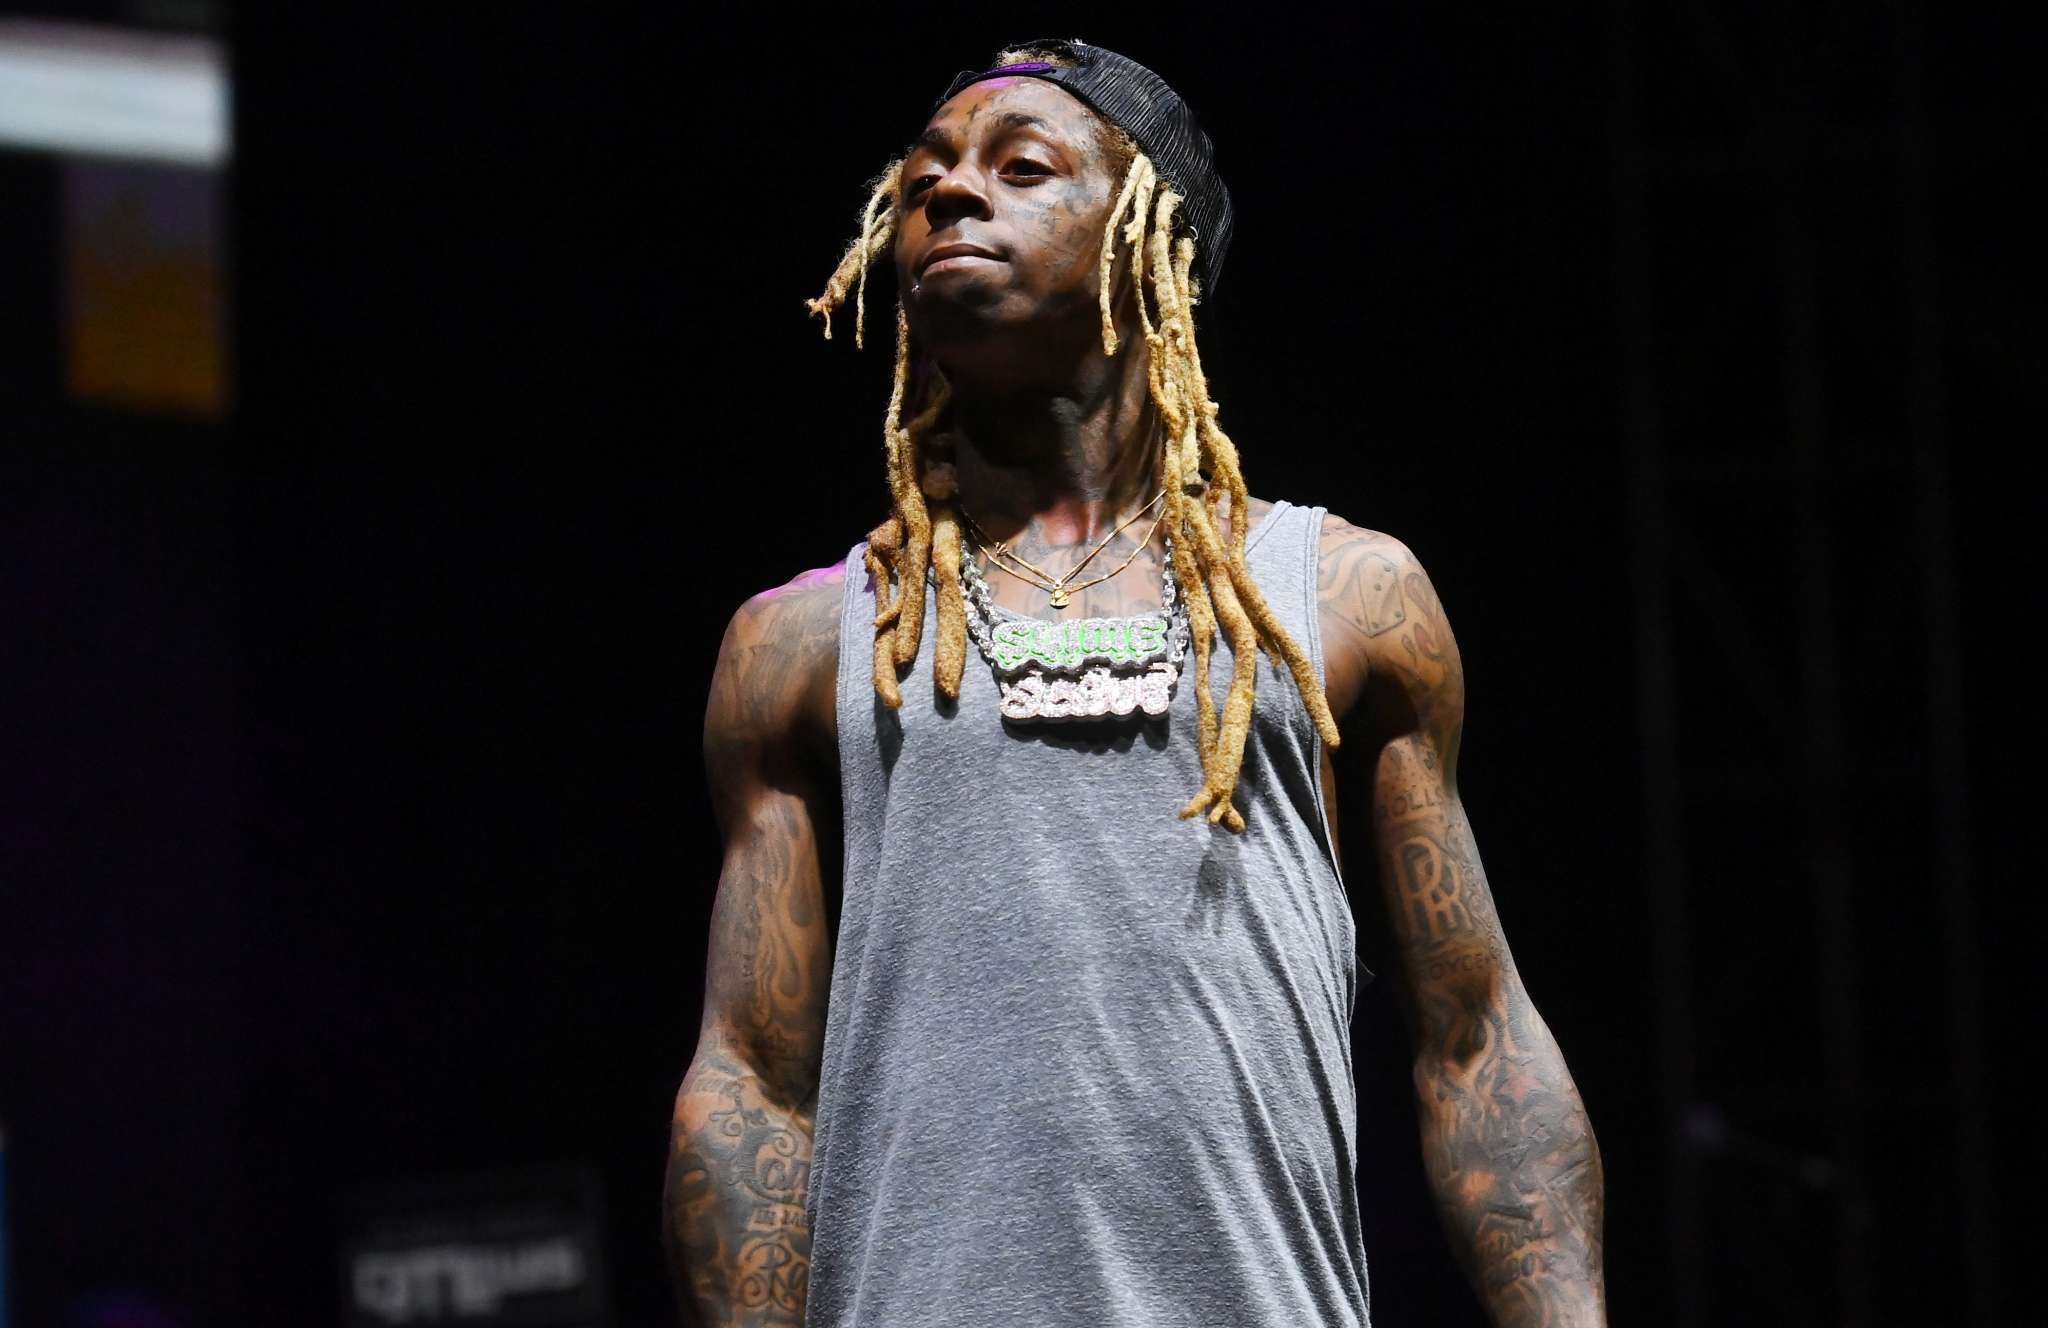 Lil Wayne Decided To Bring His Son As A Date To 2022 ESPYs